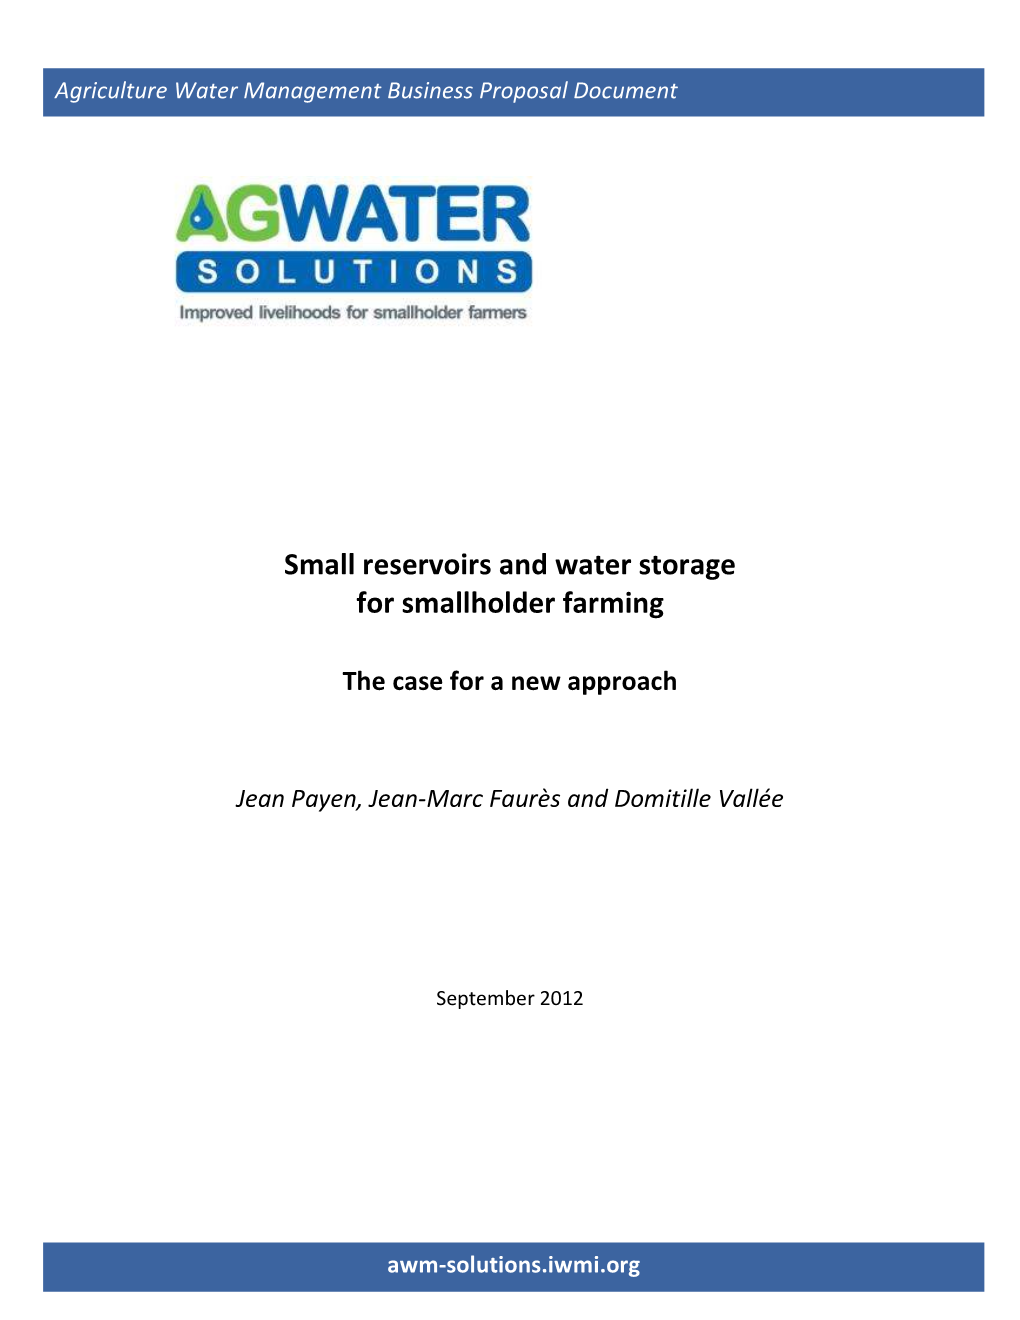 Small Reservoirs and Water Storage for Smallholder Farming